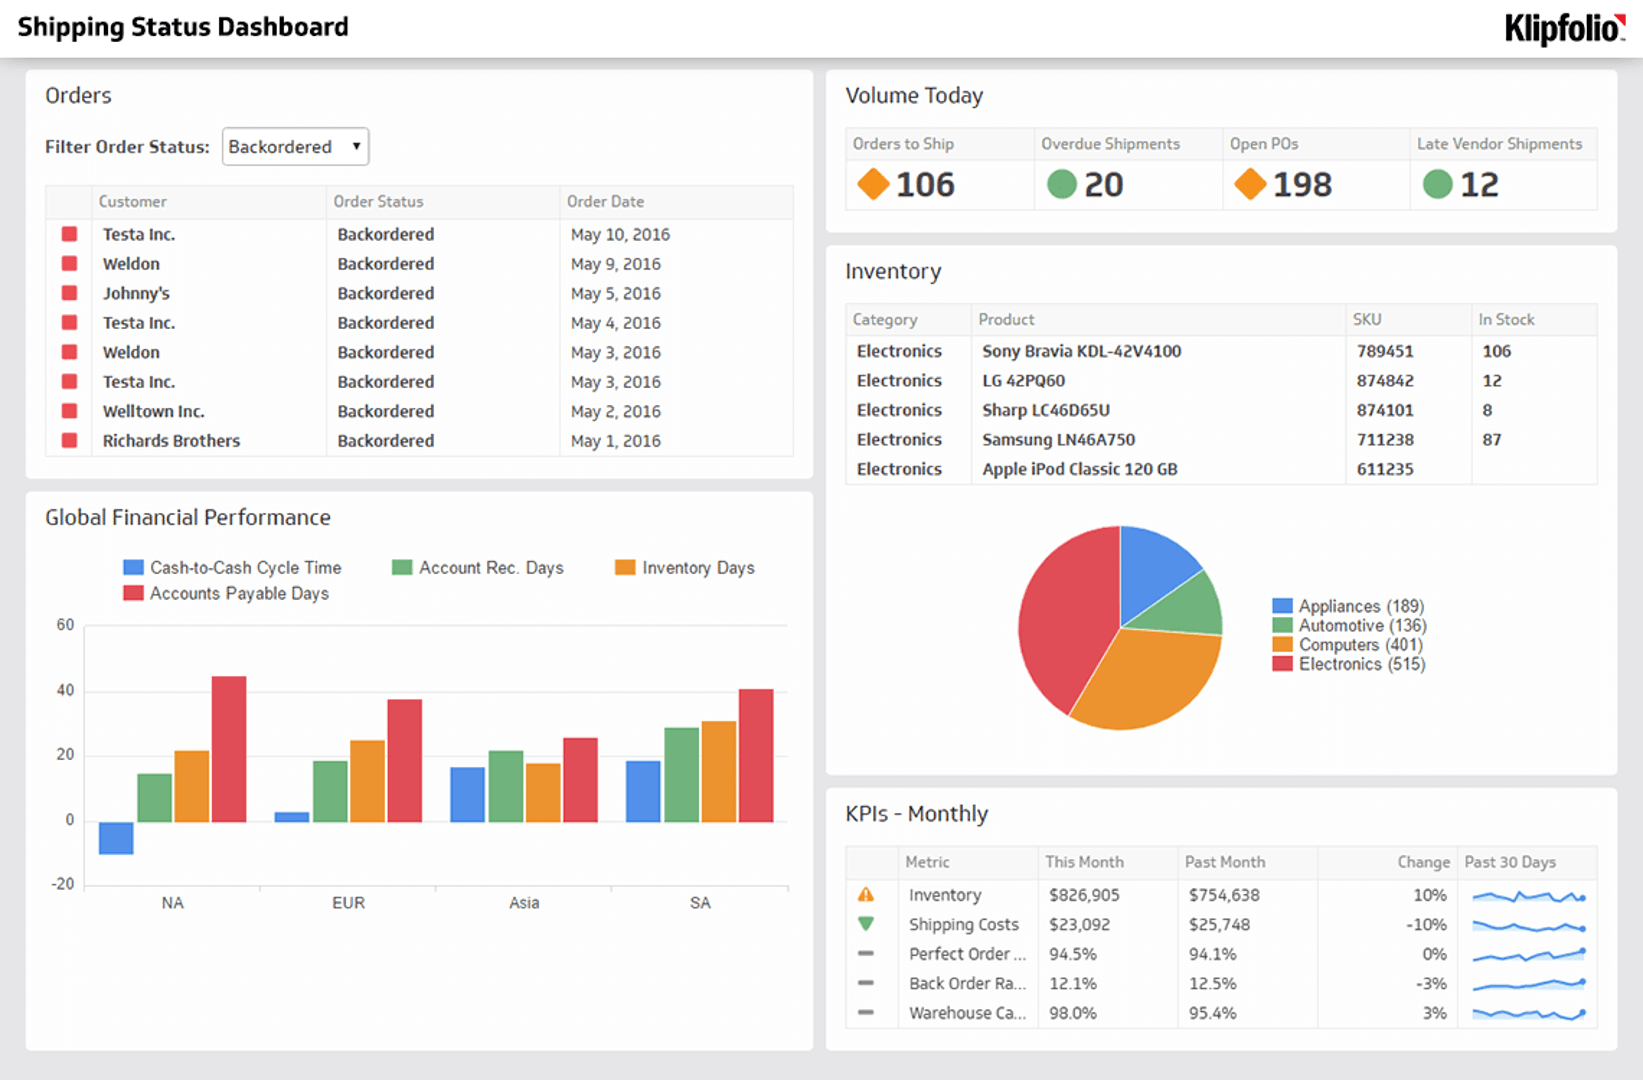 Related Dashboard Examples - Shipping Status Dashboard